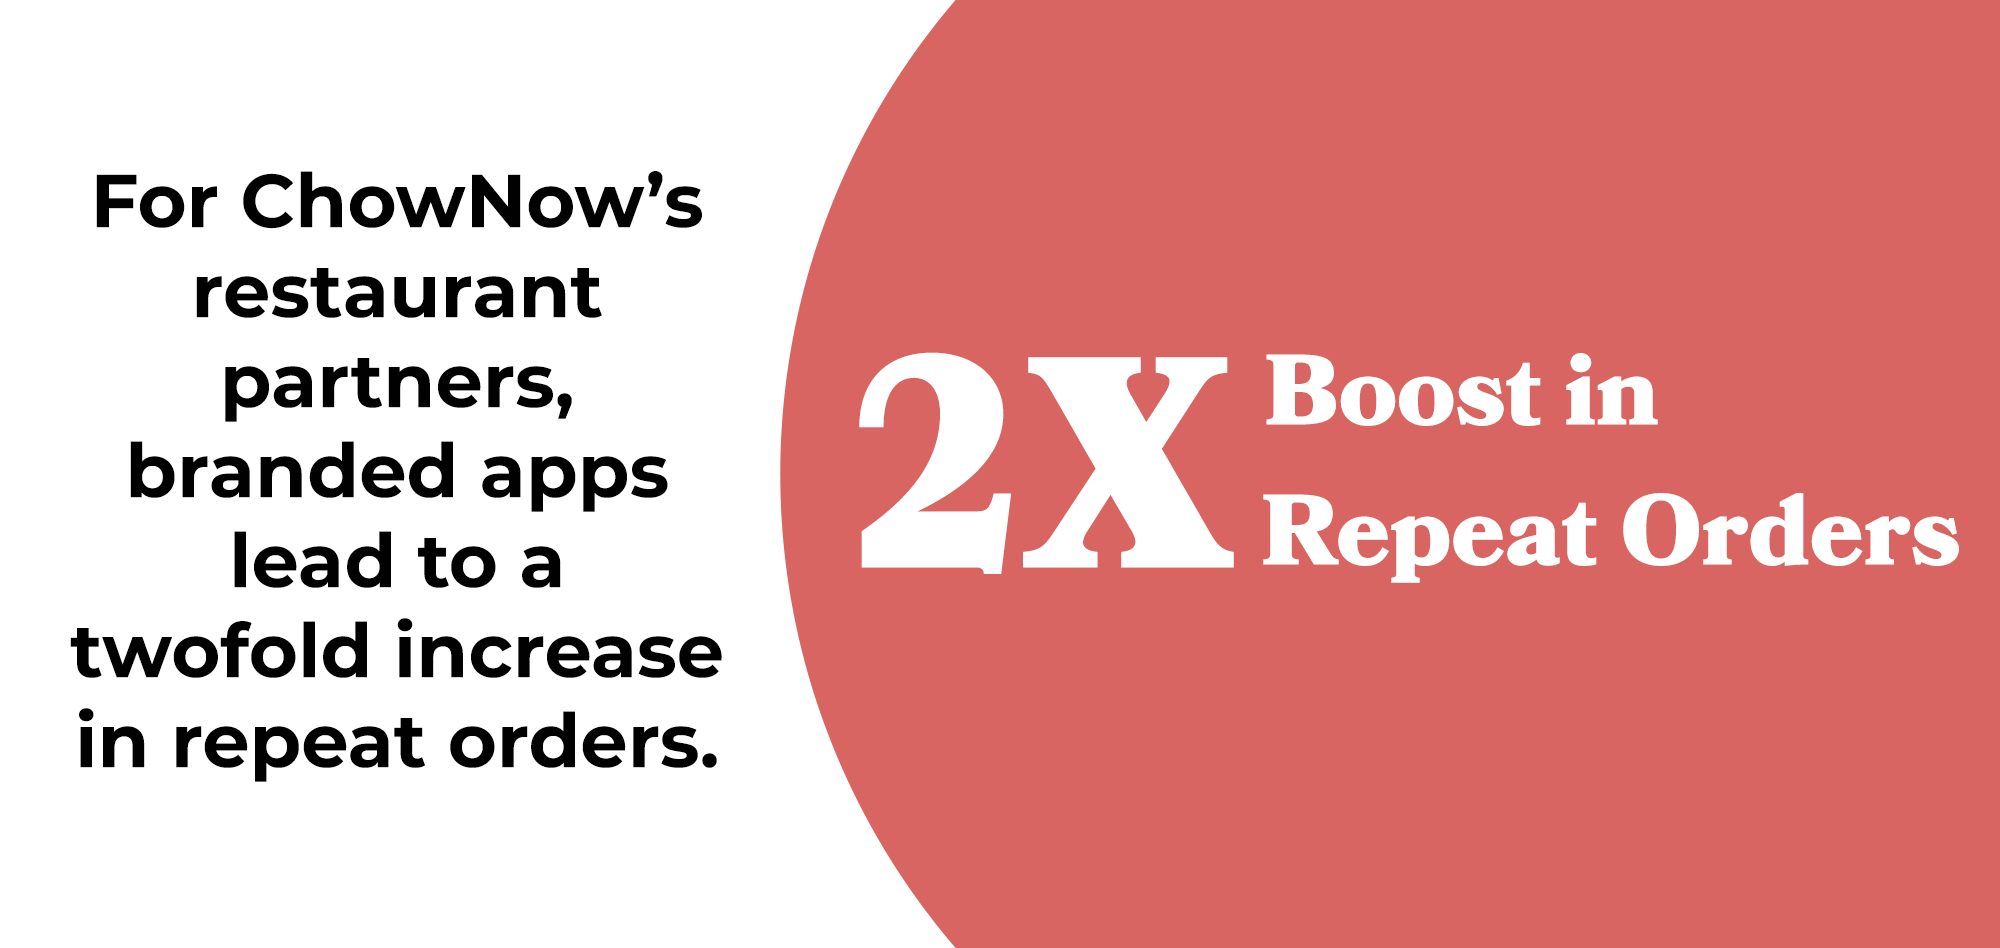 ChowNow's Mobile Apps Lead to a 2x Increase in Repeat Orders